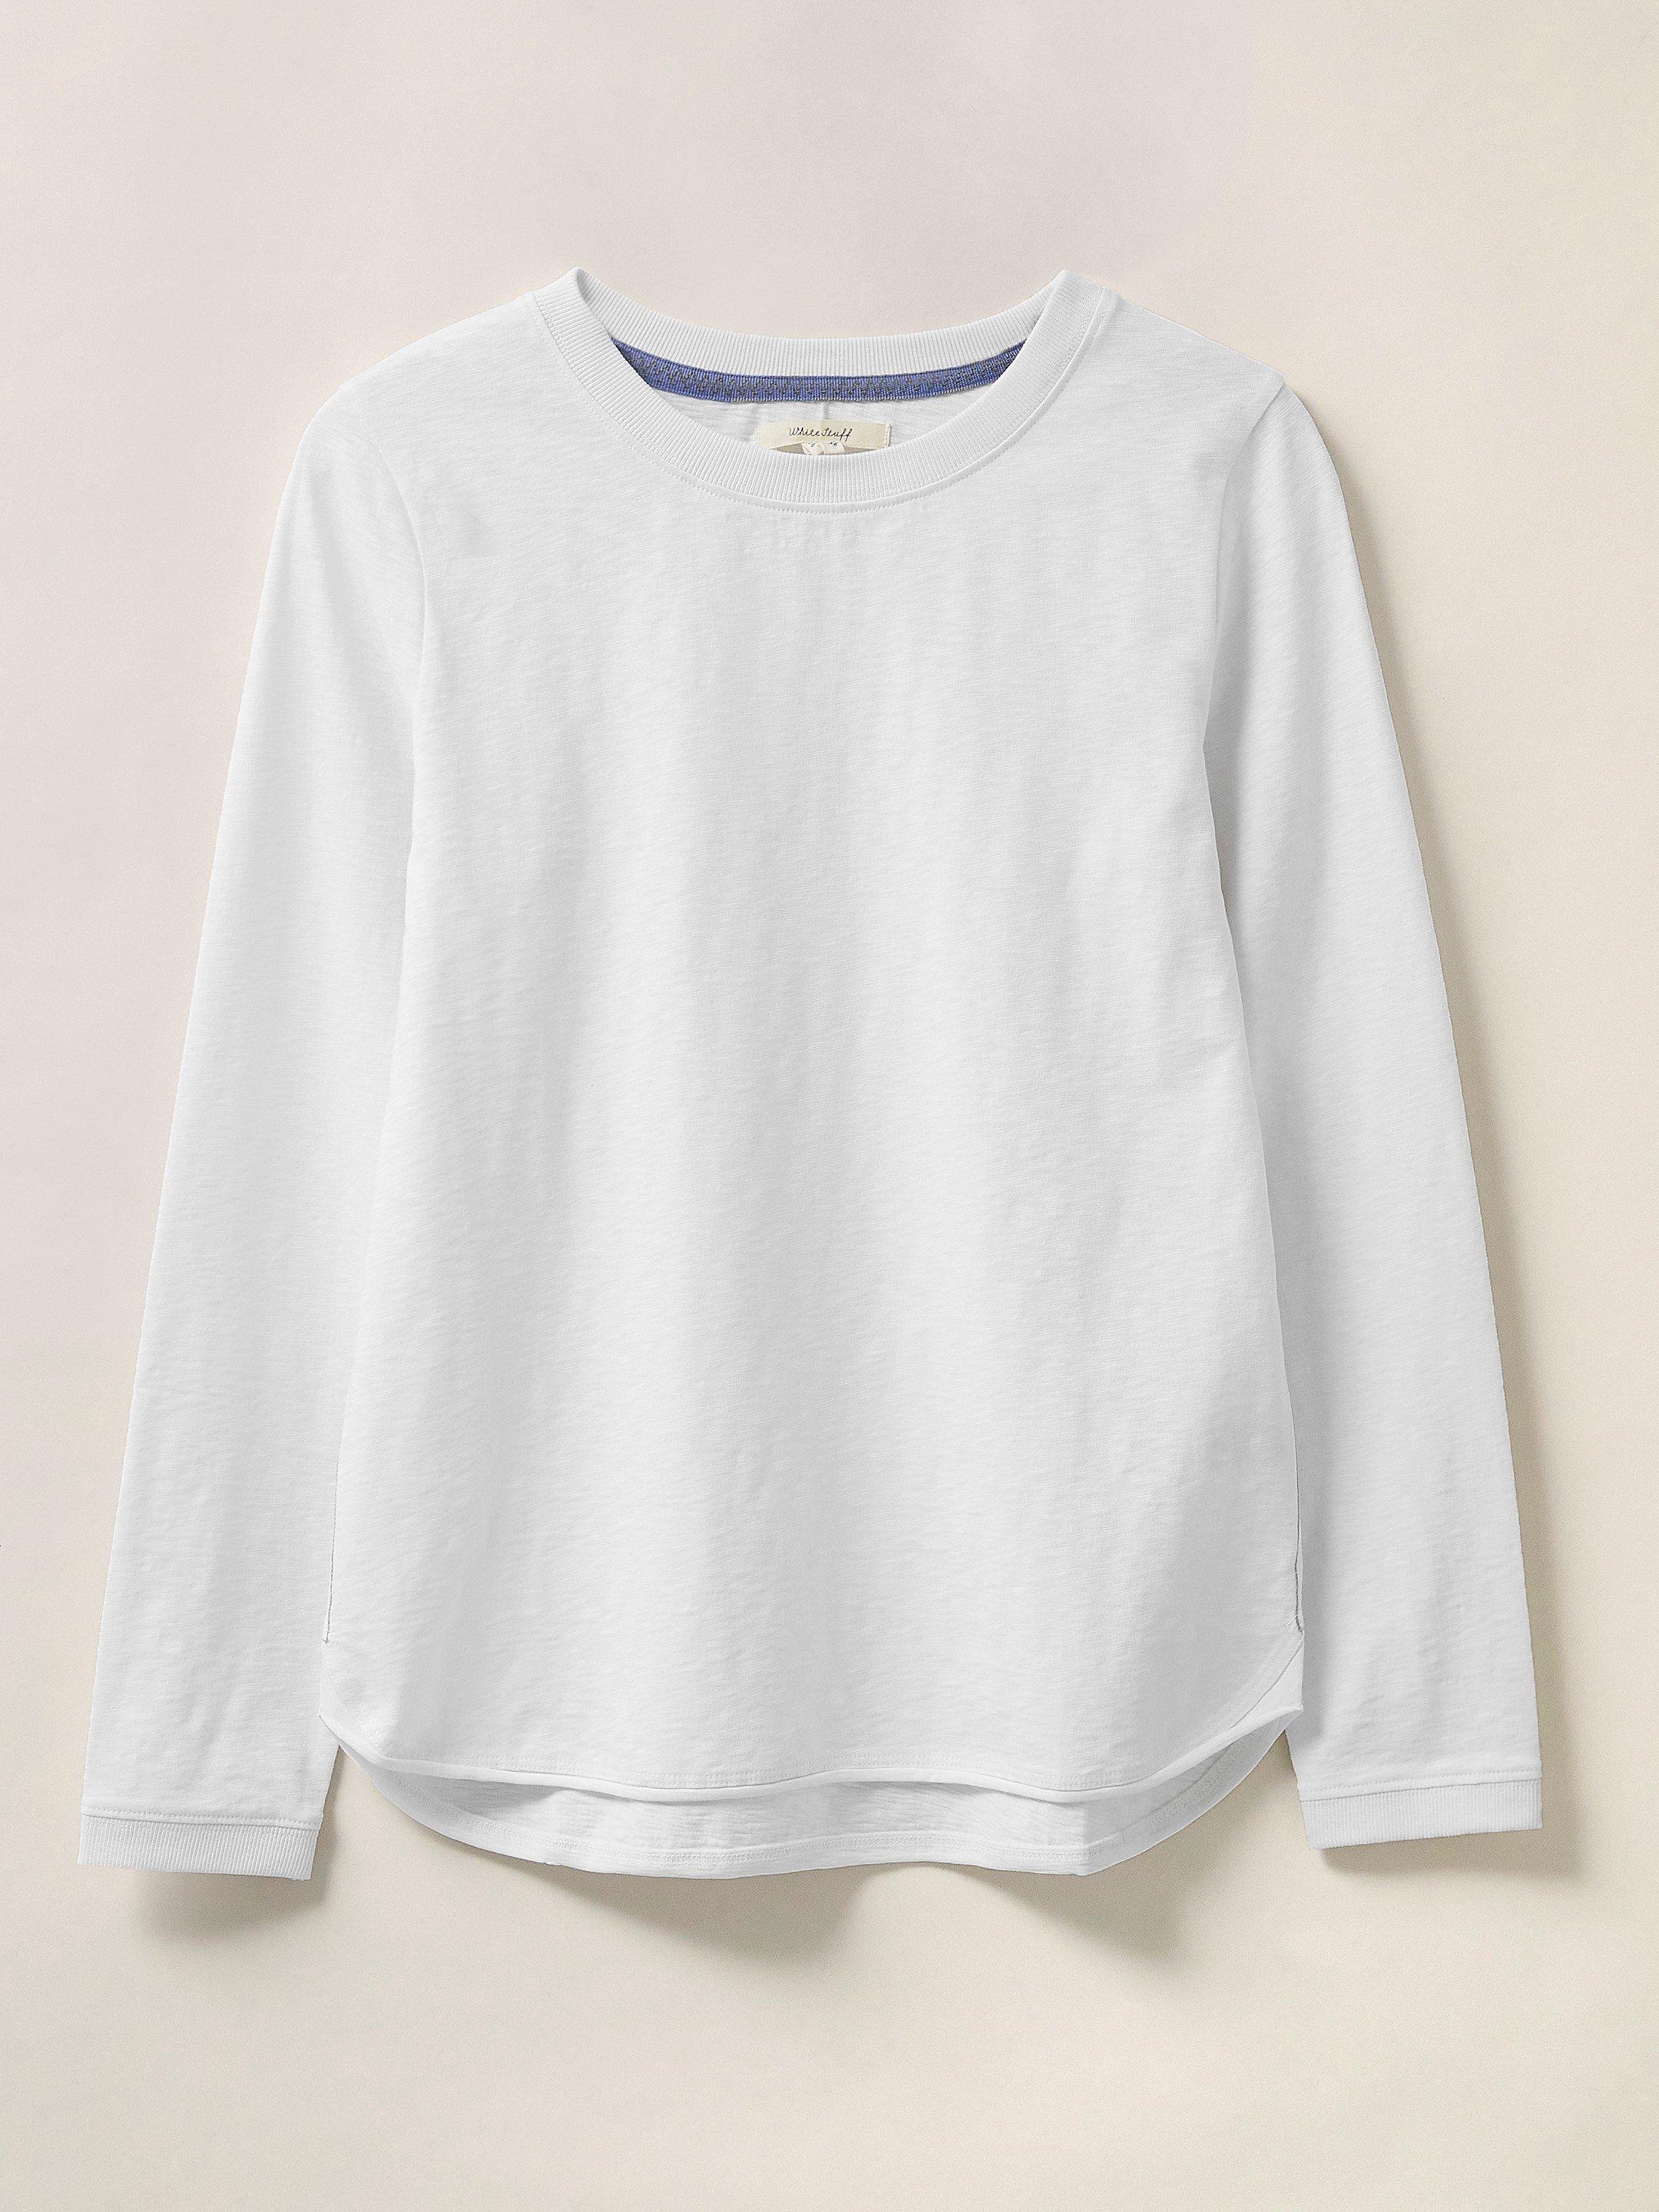 Cassie Crew Tee in PALE IVORY - FLAT FRONT